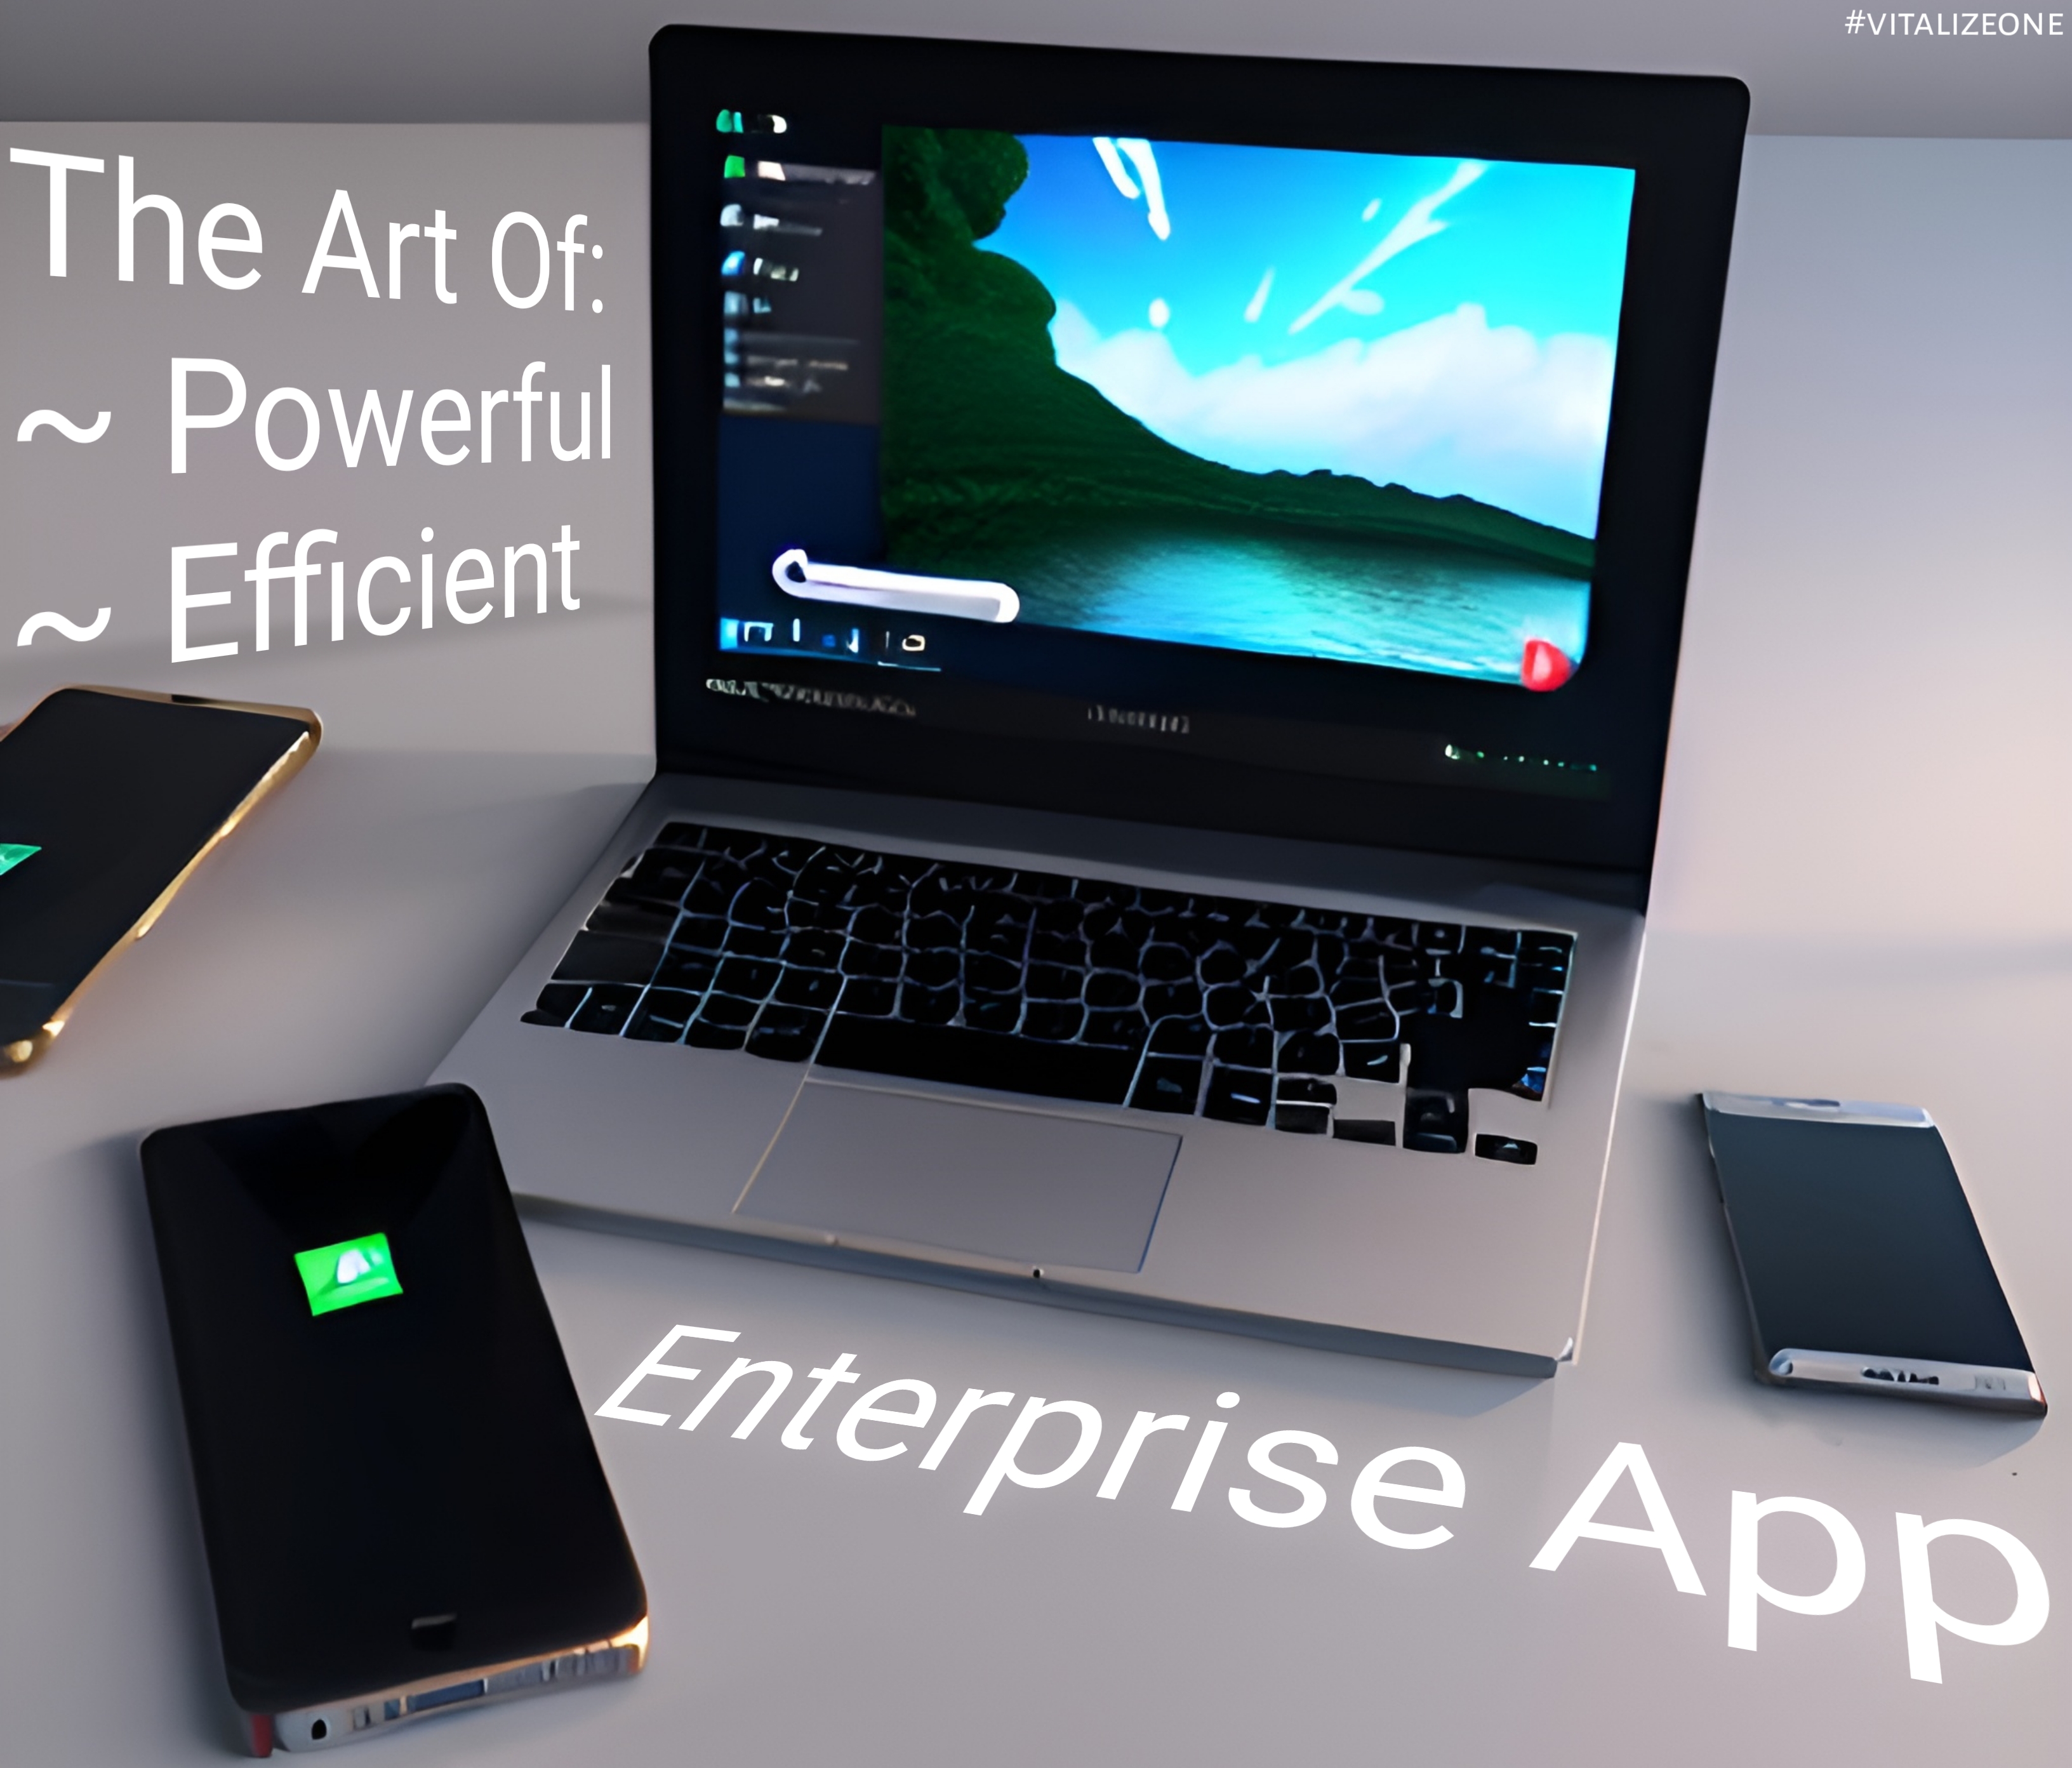 The Art of Creating Powerful and Efficient Enterprise App